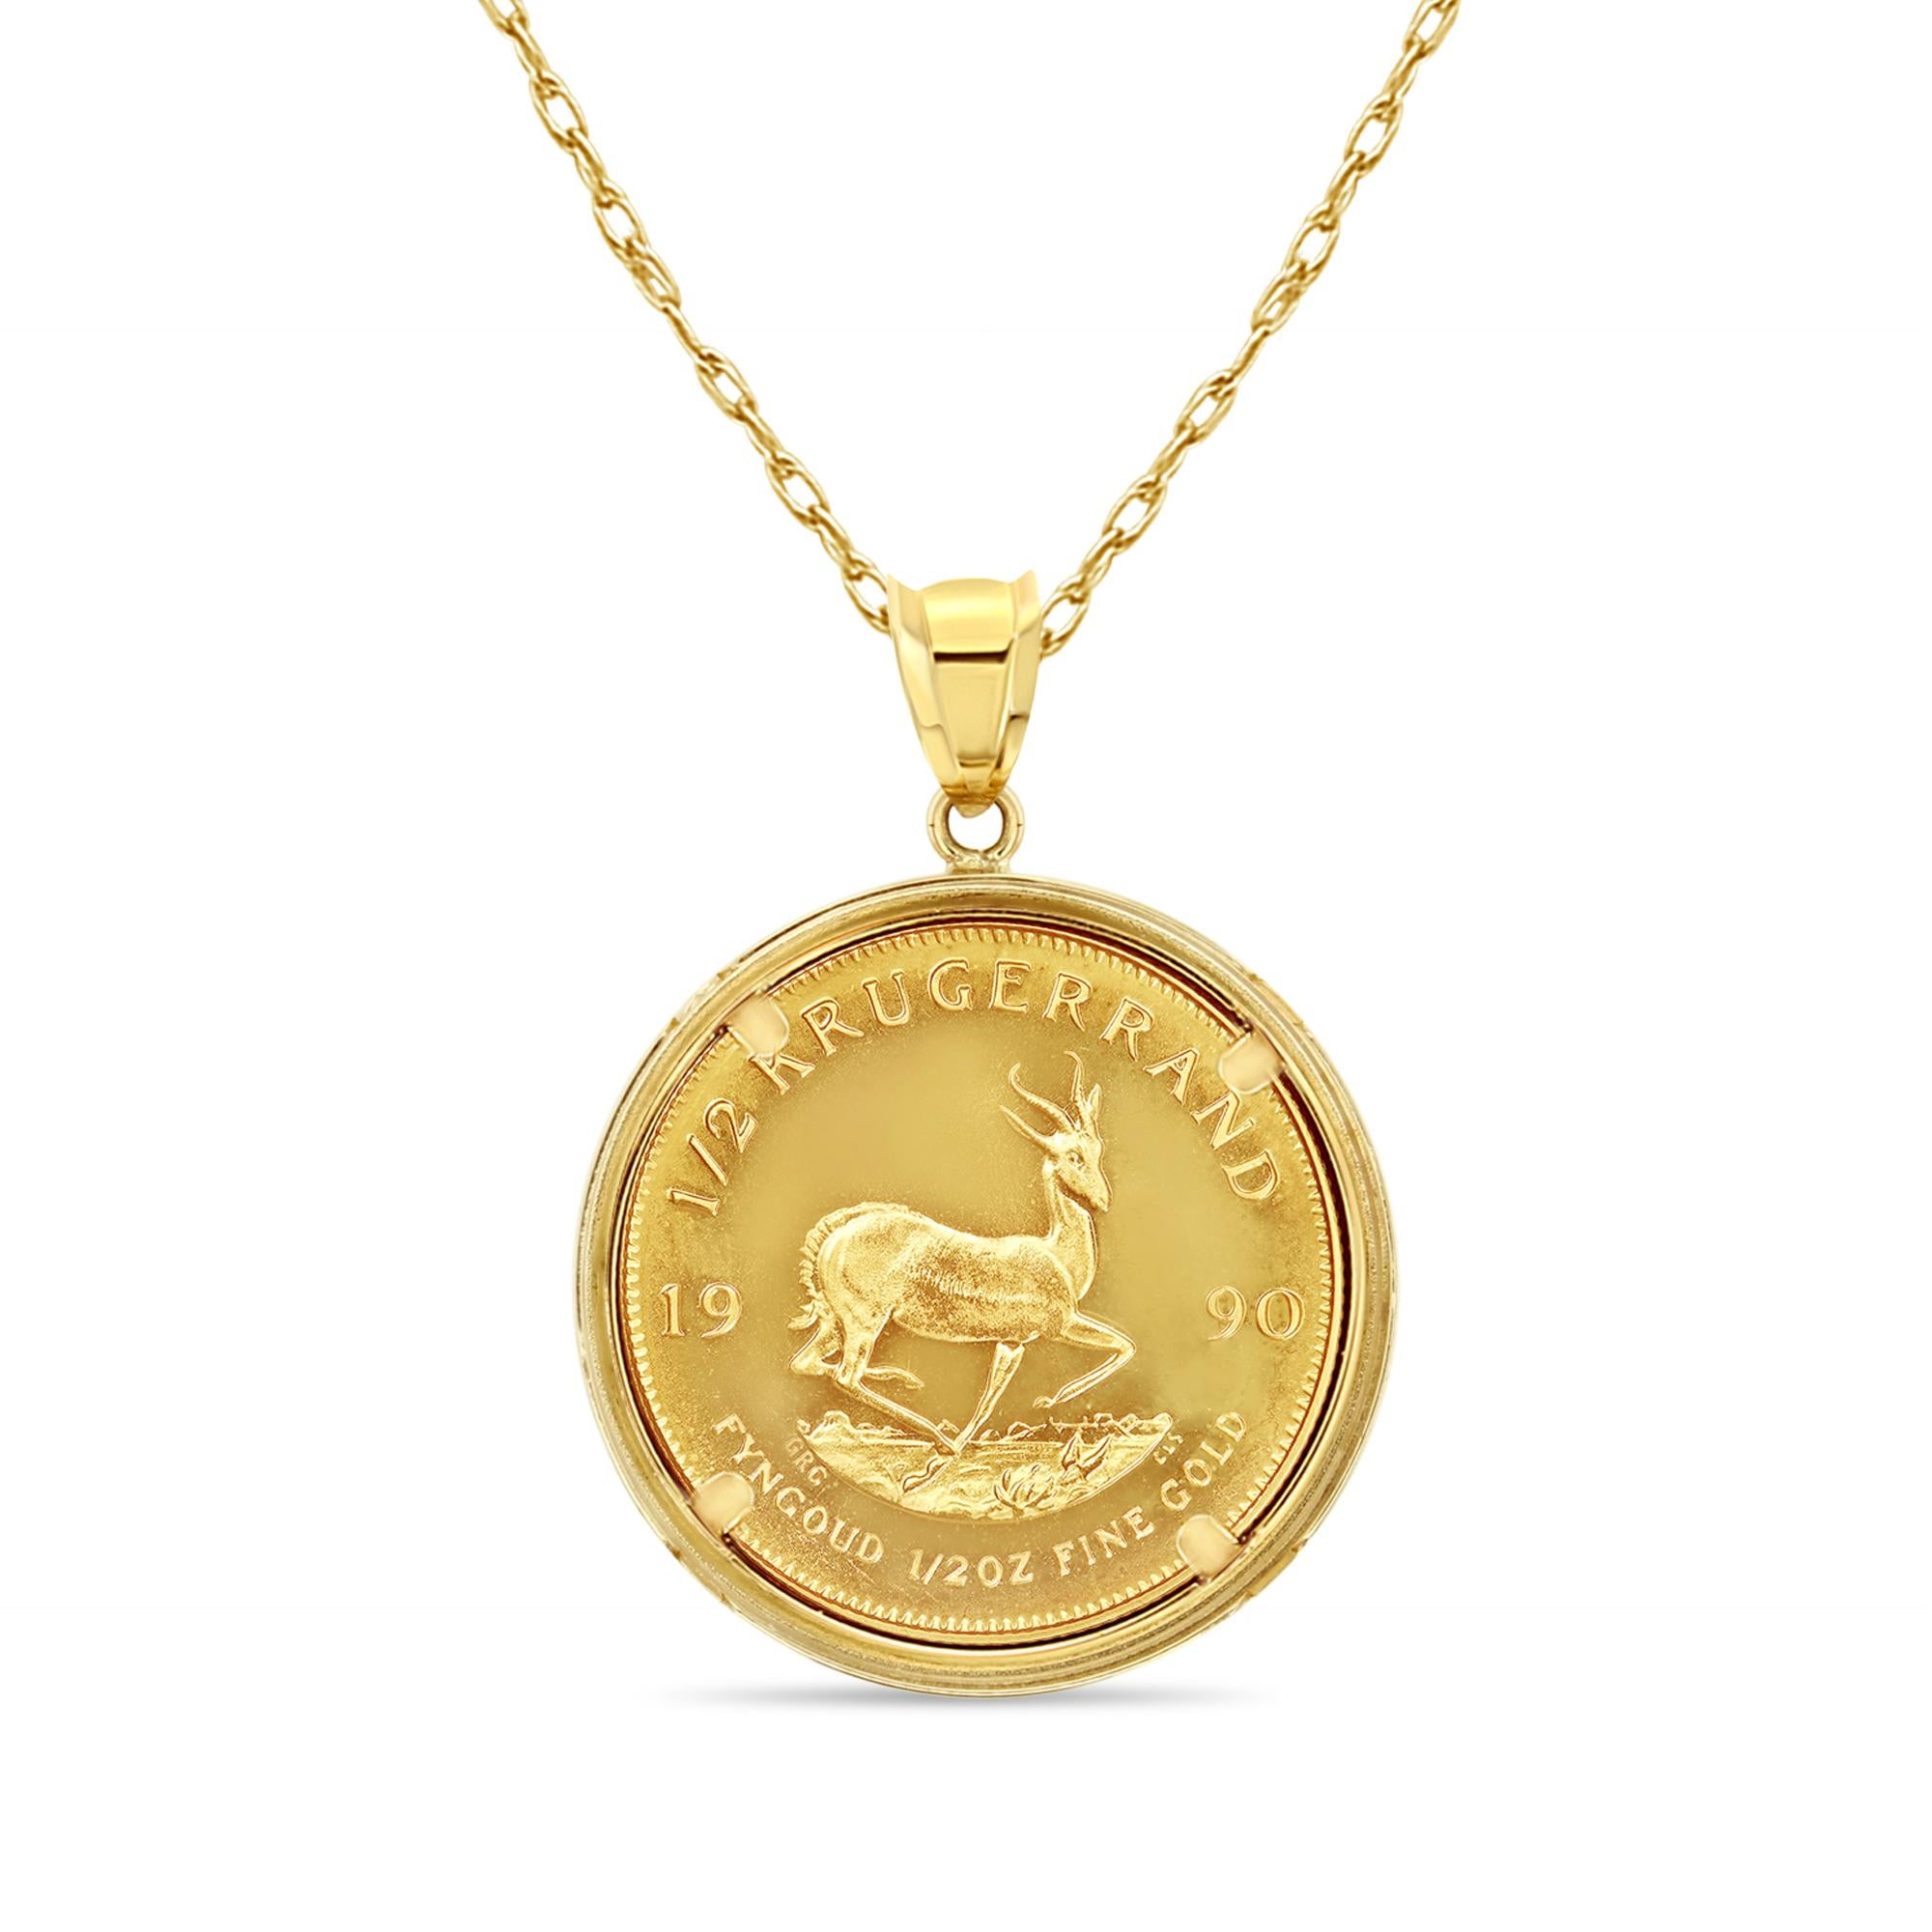 ✱ MADE TO ORDER  ✱

♥ Coin Information  ♥ 

Details: South African Krugerrand Gold Coin
Precious Metal Content: 1/2OZ
Composition: .9167 Gold Ounce
Diameter: 27mm
Year: Varies
Obverse: Paul Kruger
Reverse: Antelope

 ♥ Bezel Information  ♥ 

Style: